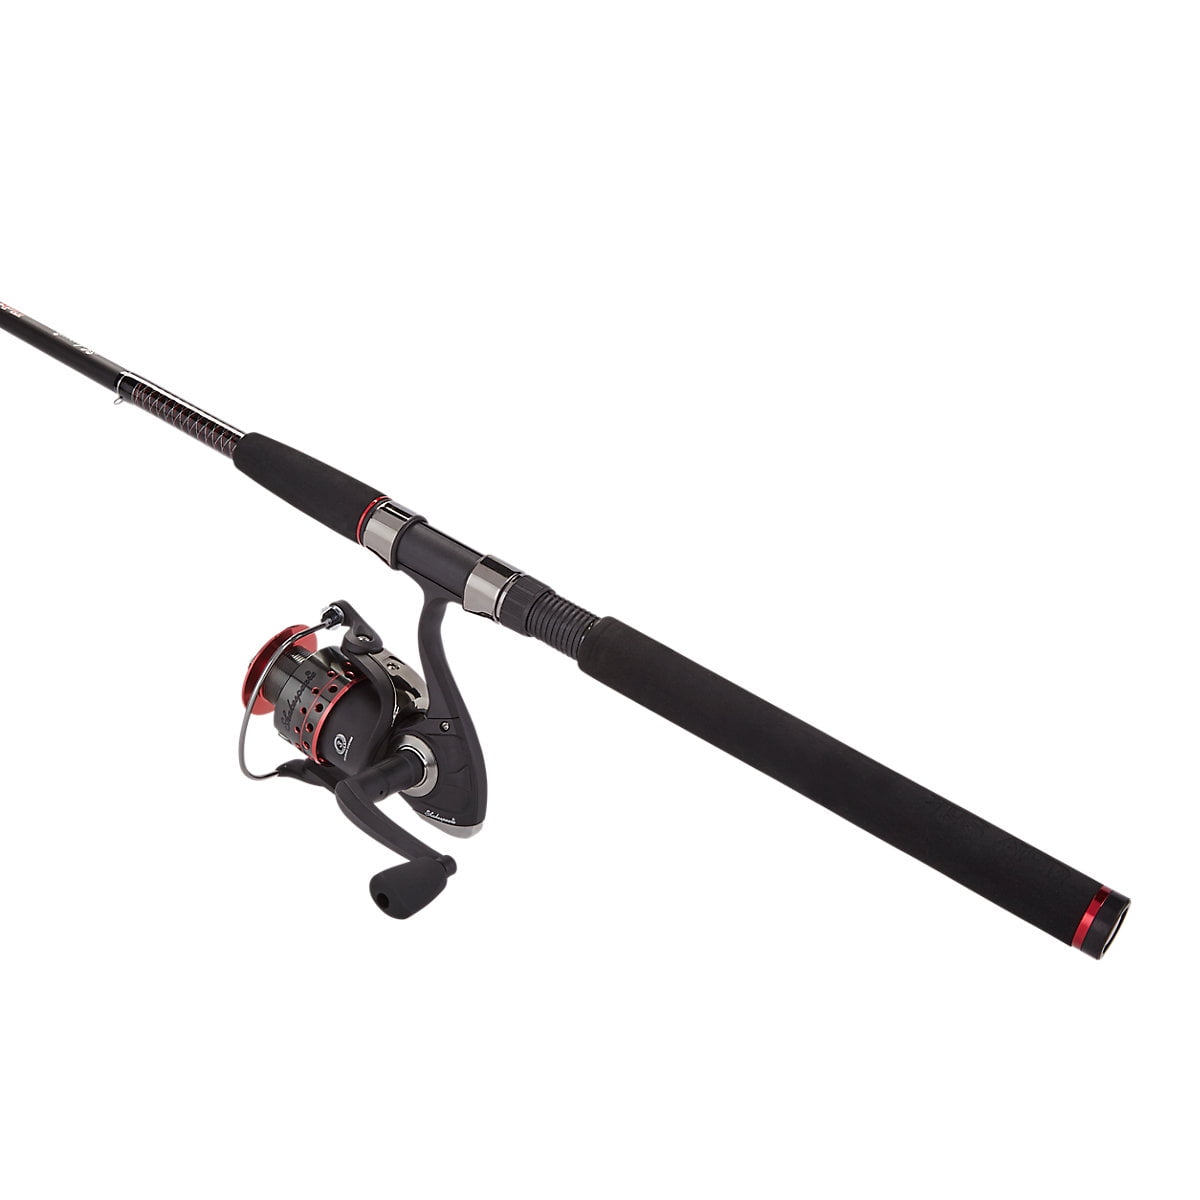 Ugly Stik 5’ GX2 Spinning Fishing Rod and Reel Spinning Combo